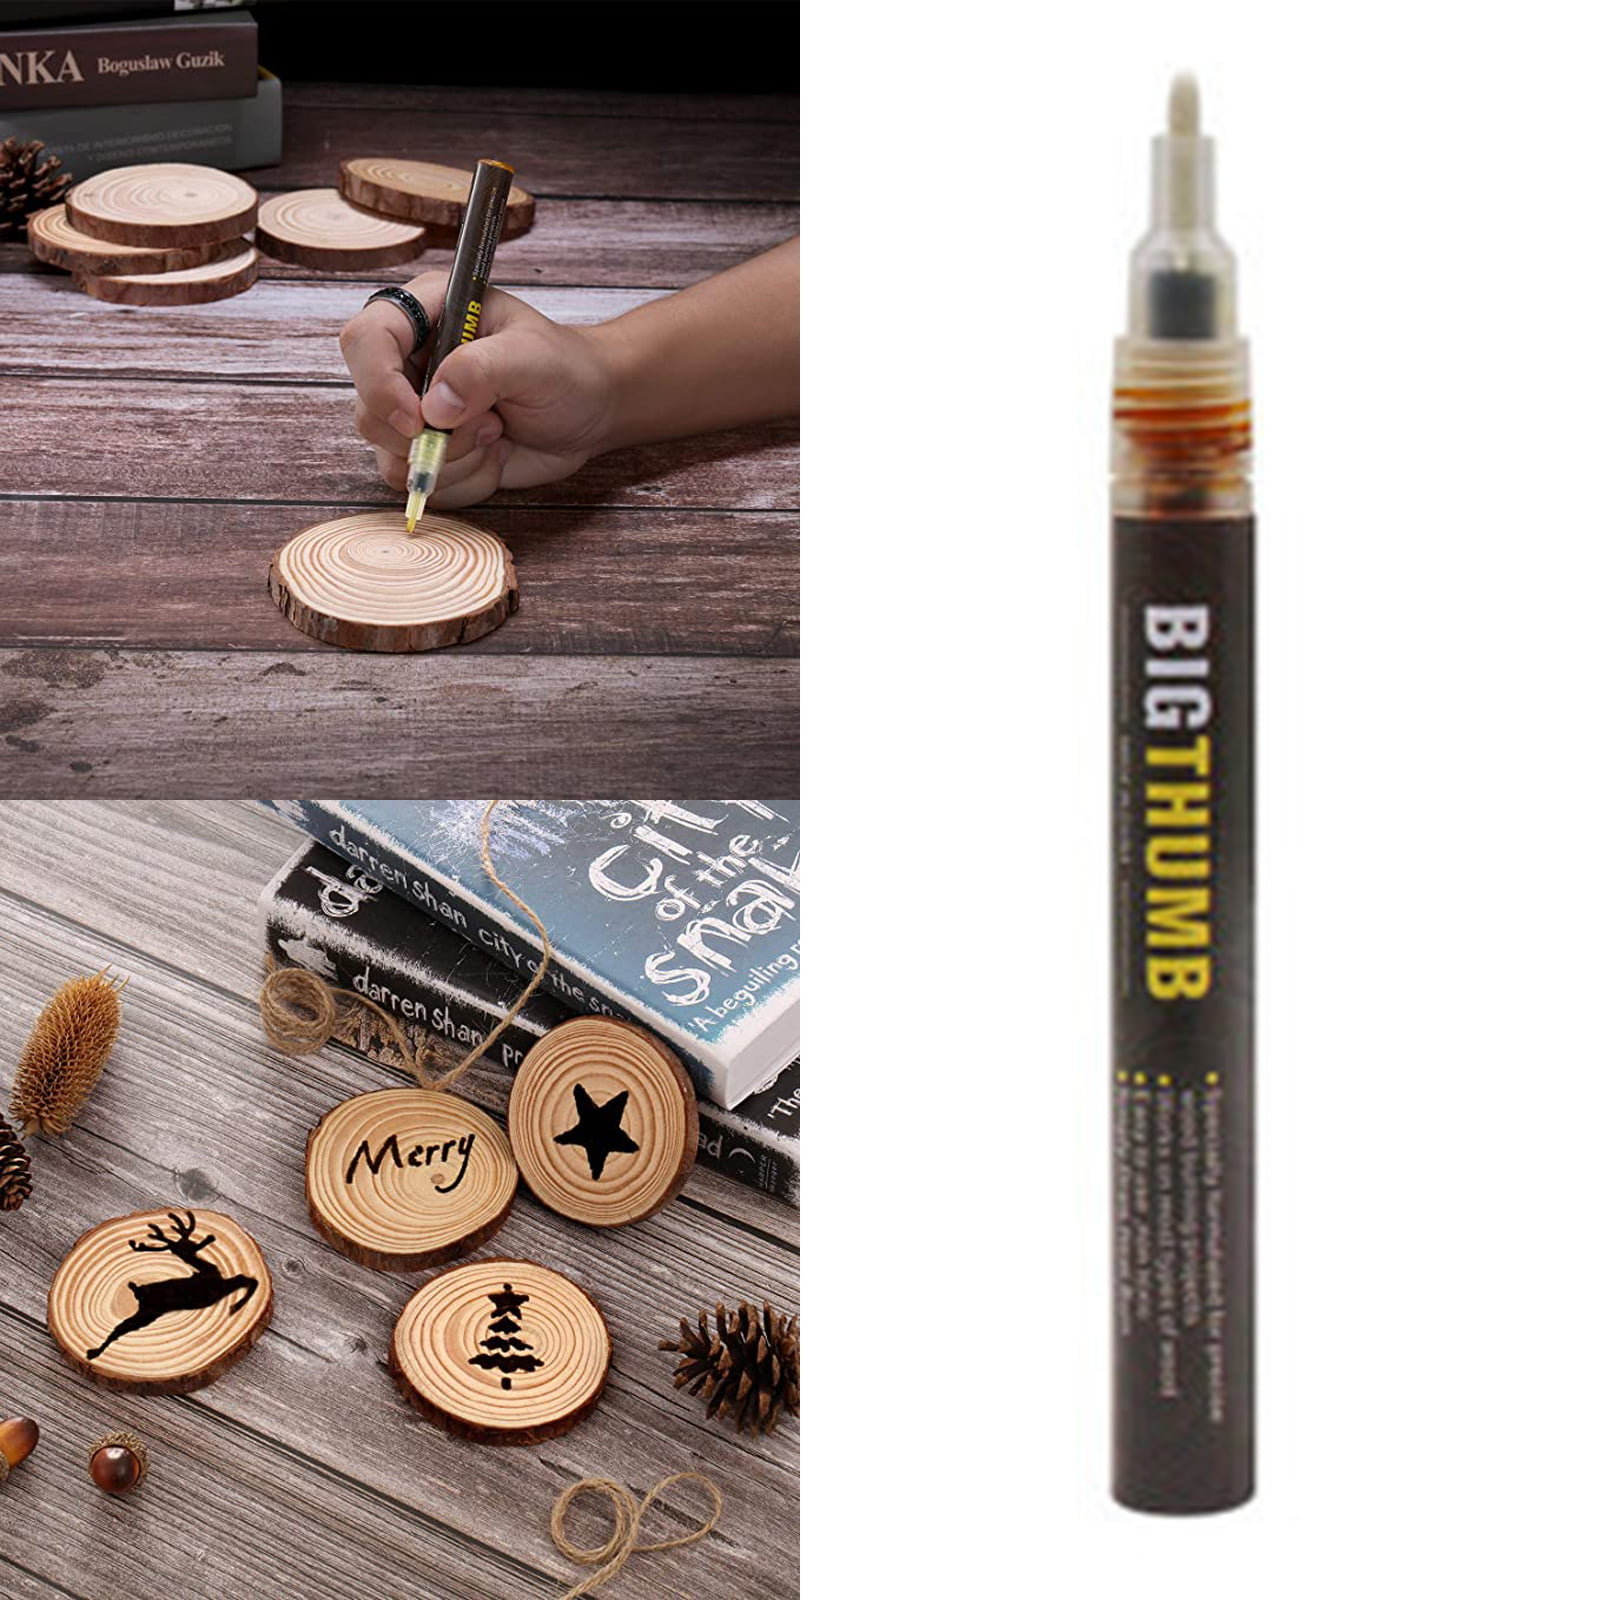 Scorch Markers Chemical Wood Burning Pen For Project Woodworking DIY I3U8